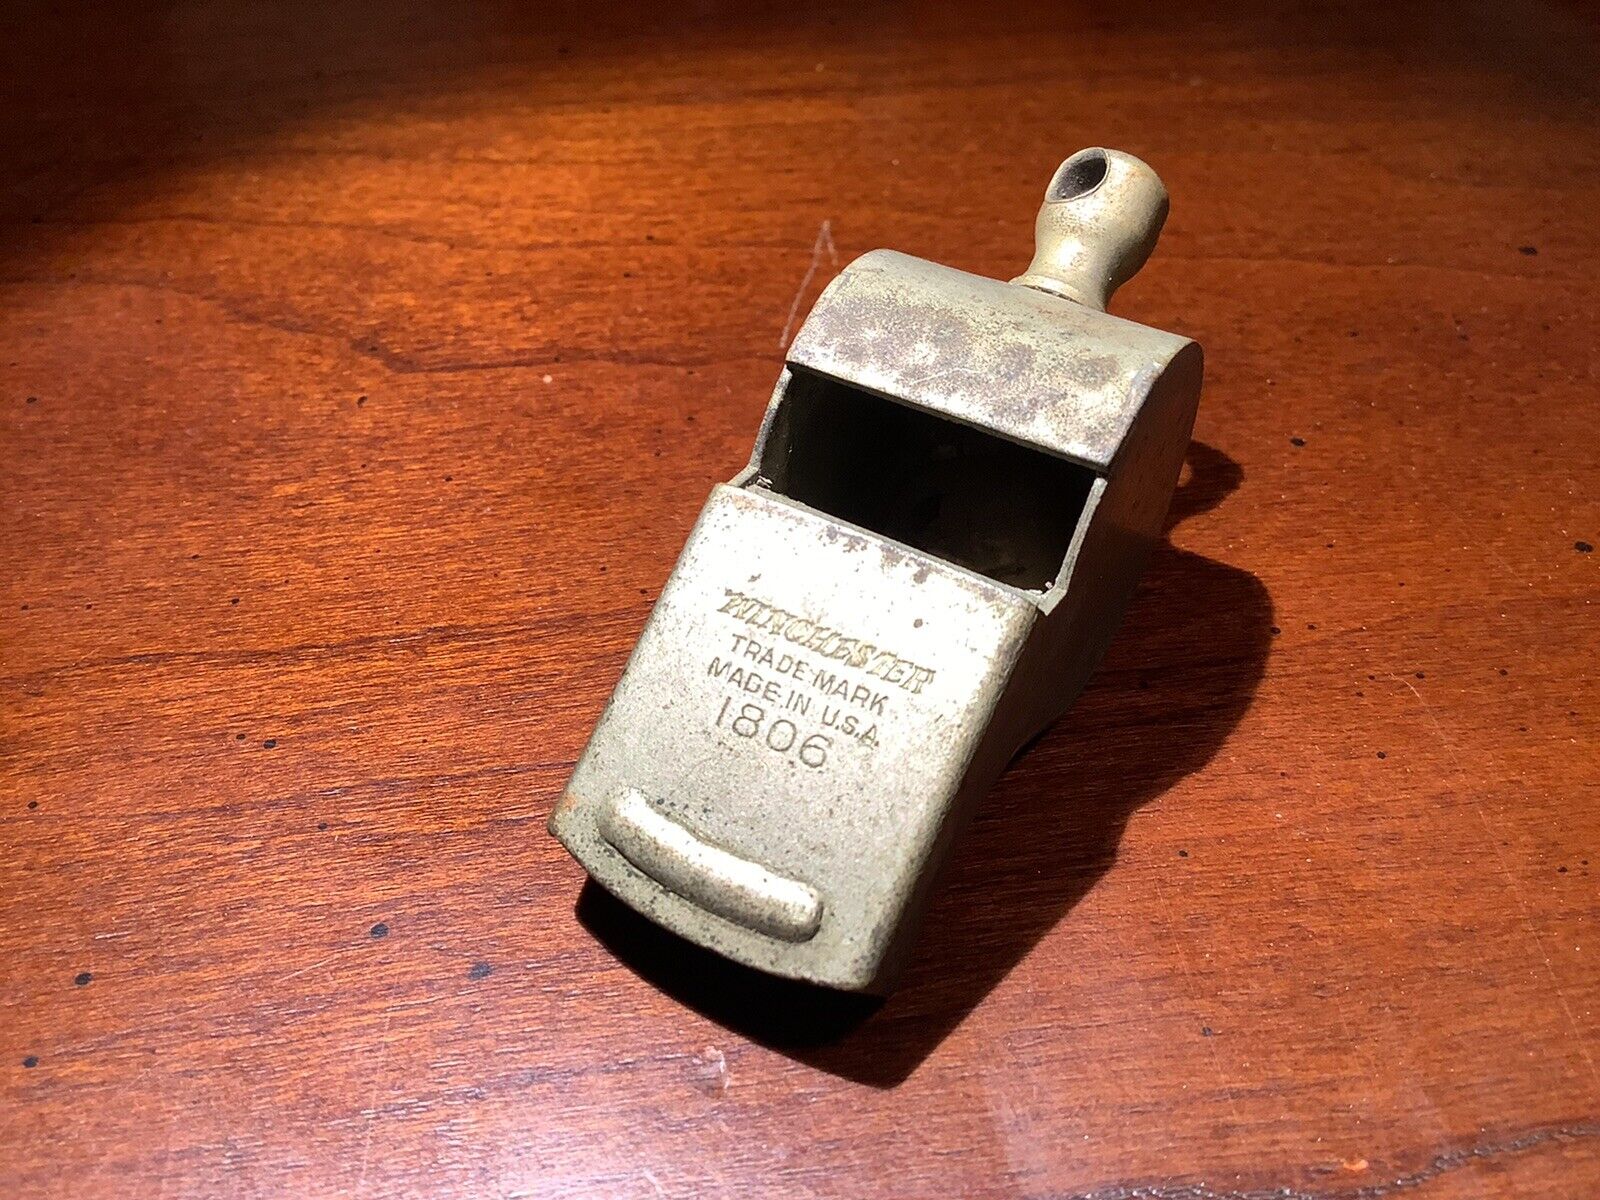 RARE Winchester 1806 Whistle, Made in Usa 1930s (Works no dents)